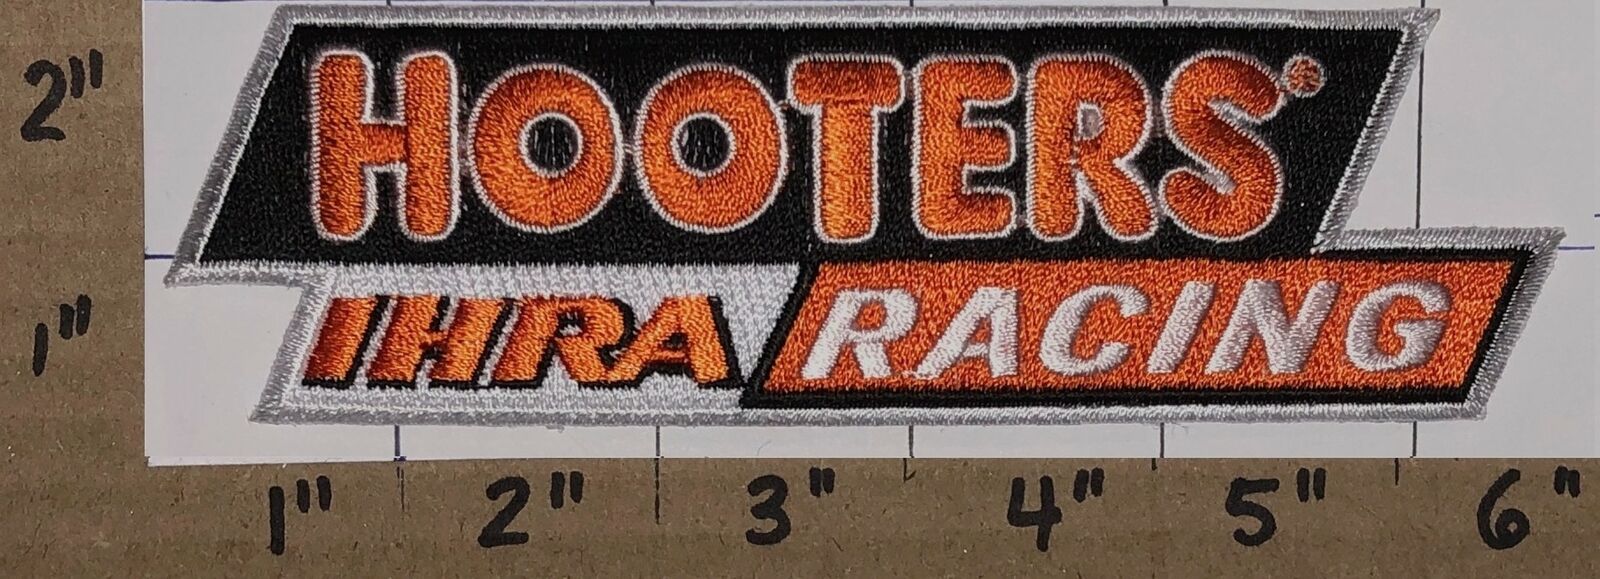 1 HOOTERS IHRA RACING TOP FUEL DRAGSTER RACING HOT ROD CREST EMBLEM PATCH